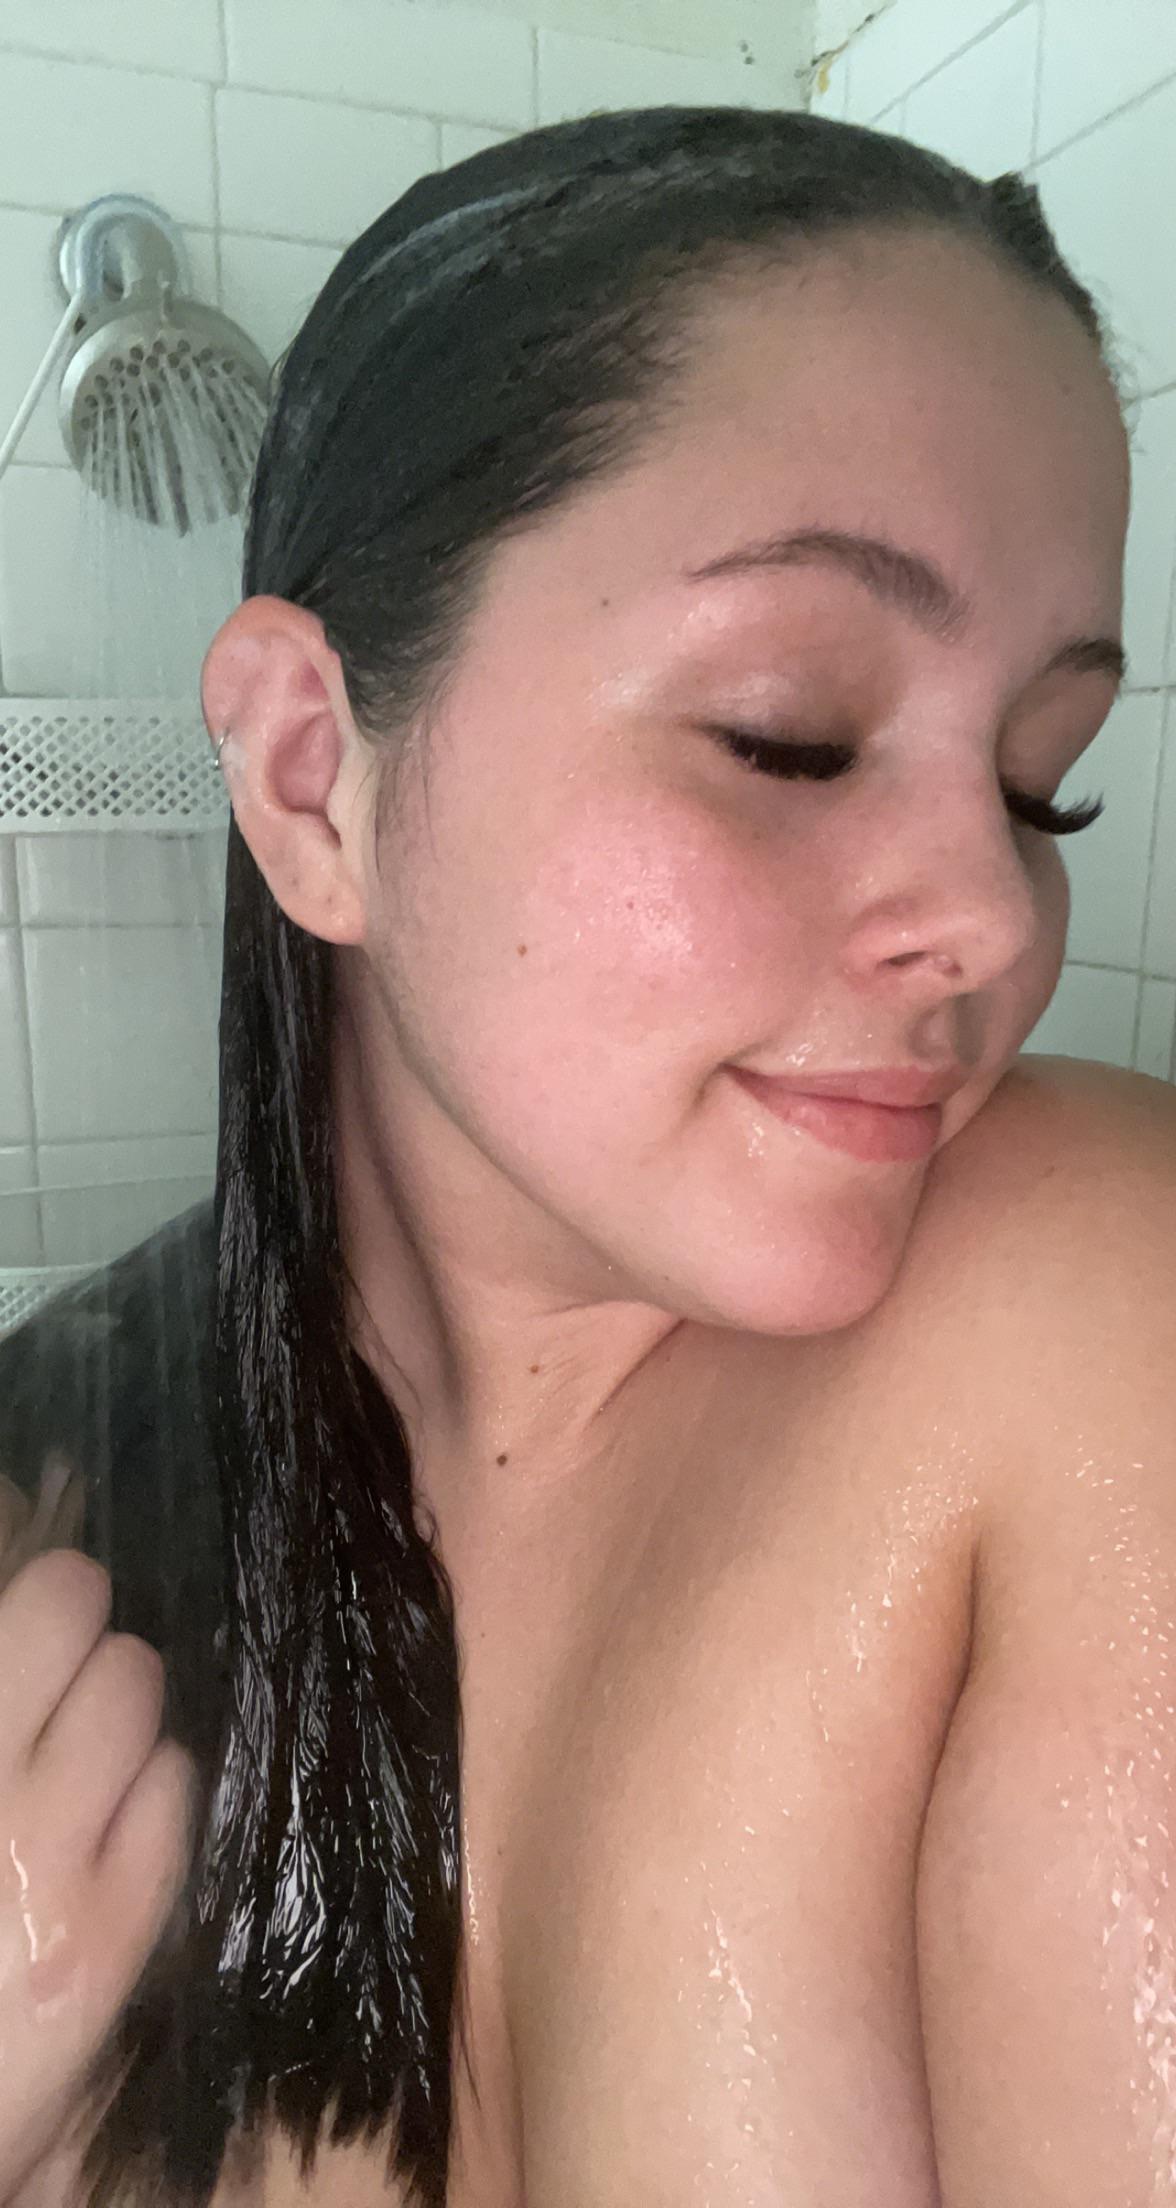 Mid shower cleavage;)